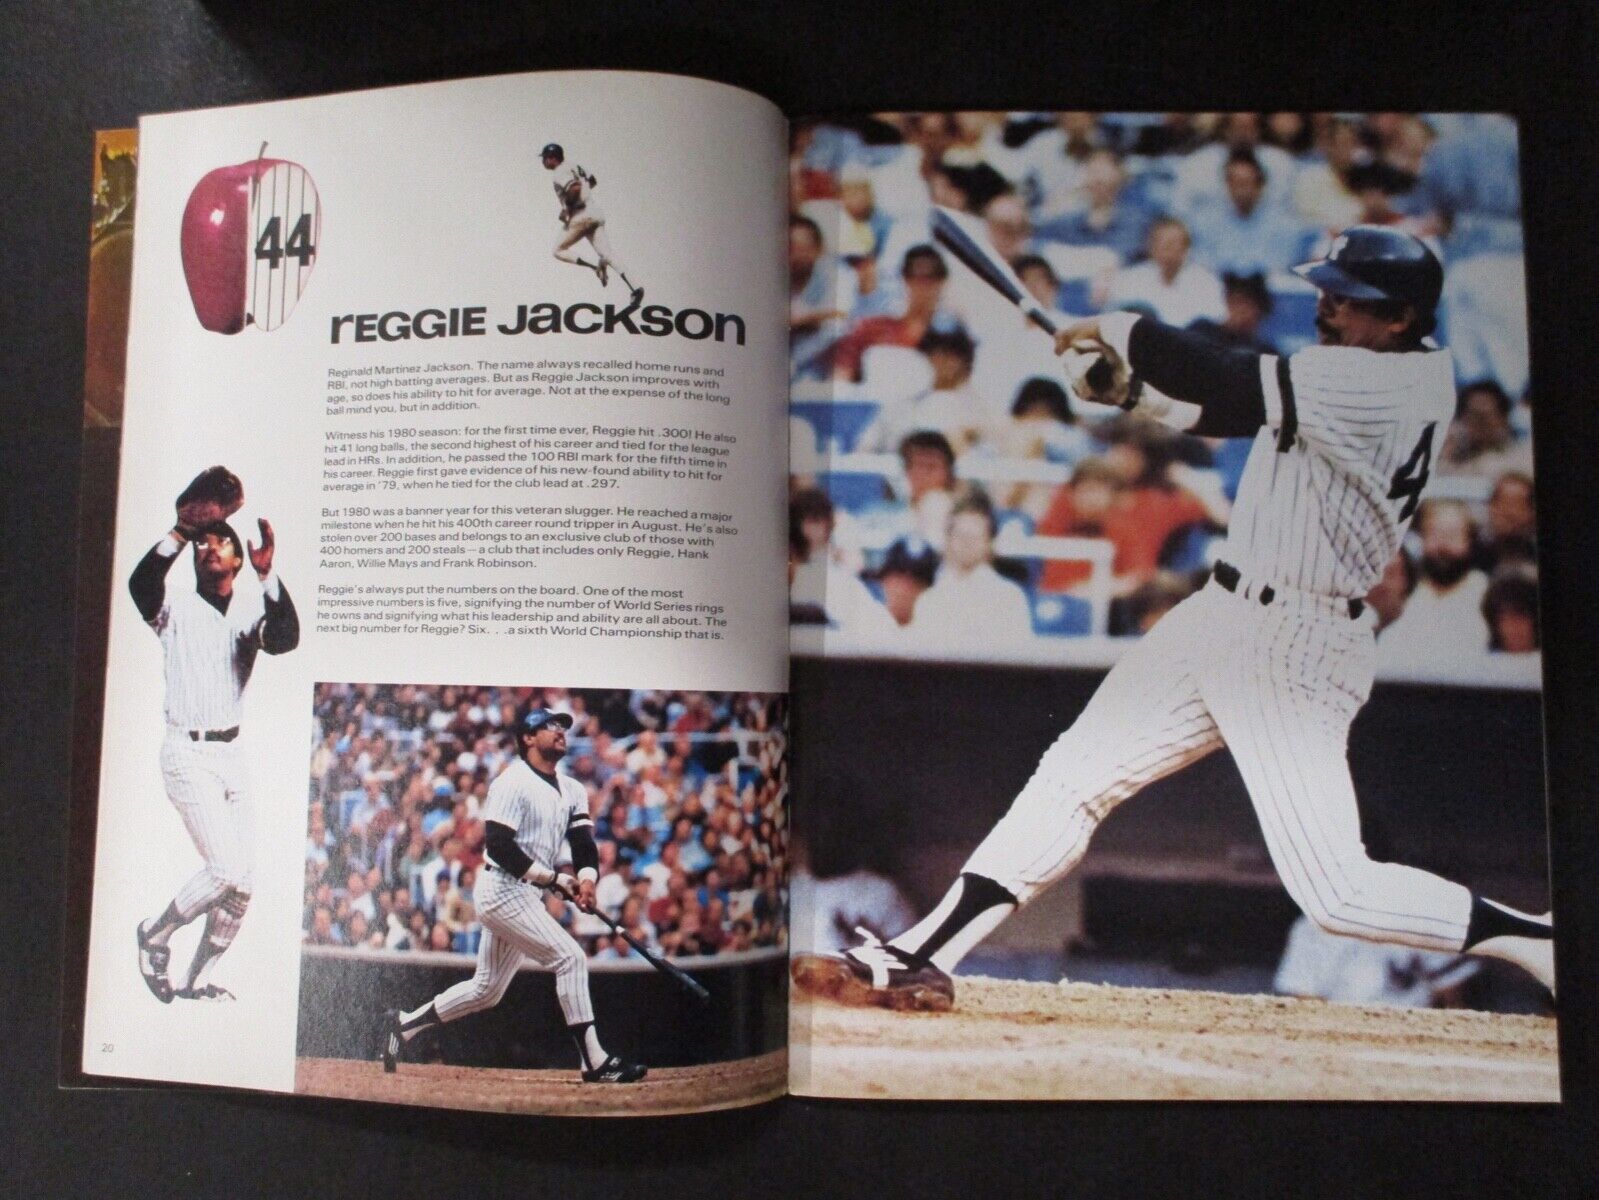 New York Yankees 1981 Official Yearbook part of the Big Apple G-VG Condition